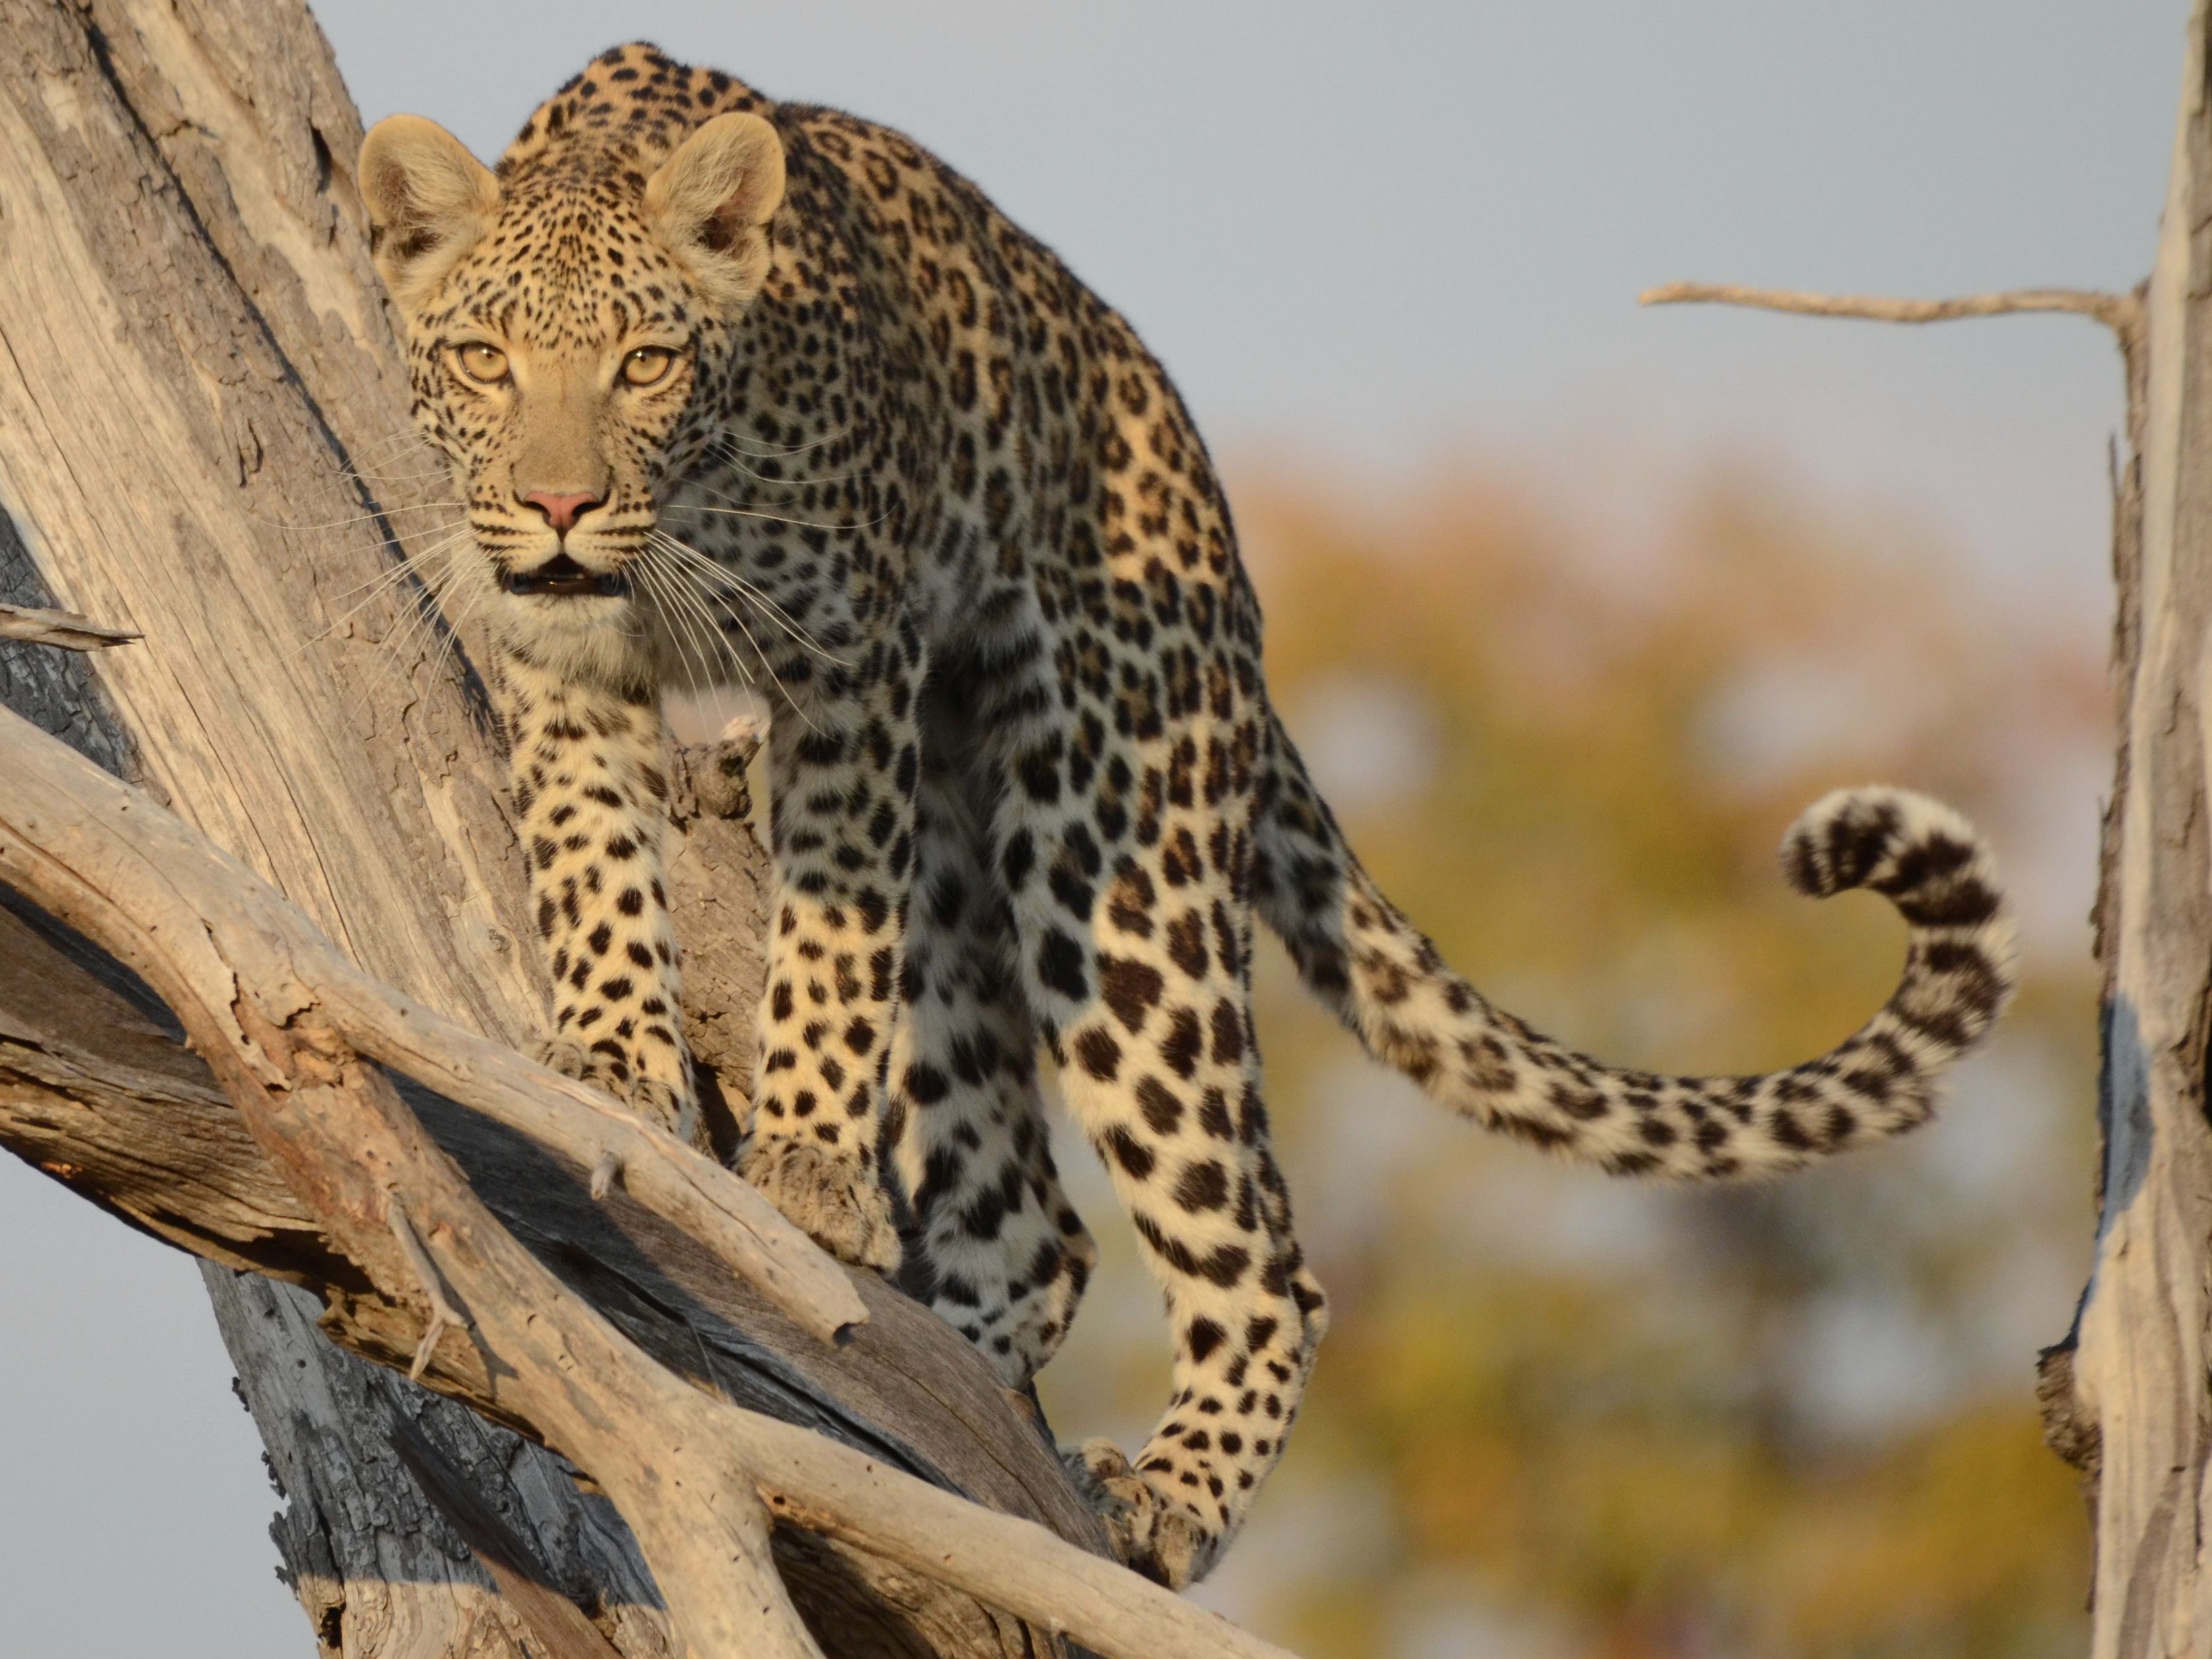 Click picture to see more Fauna  Leopards.